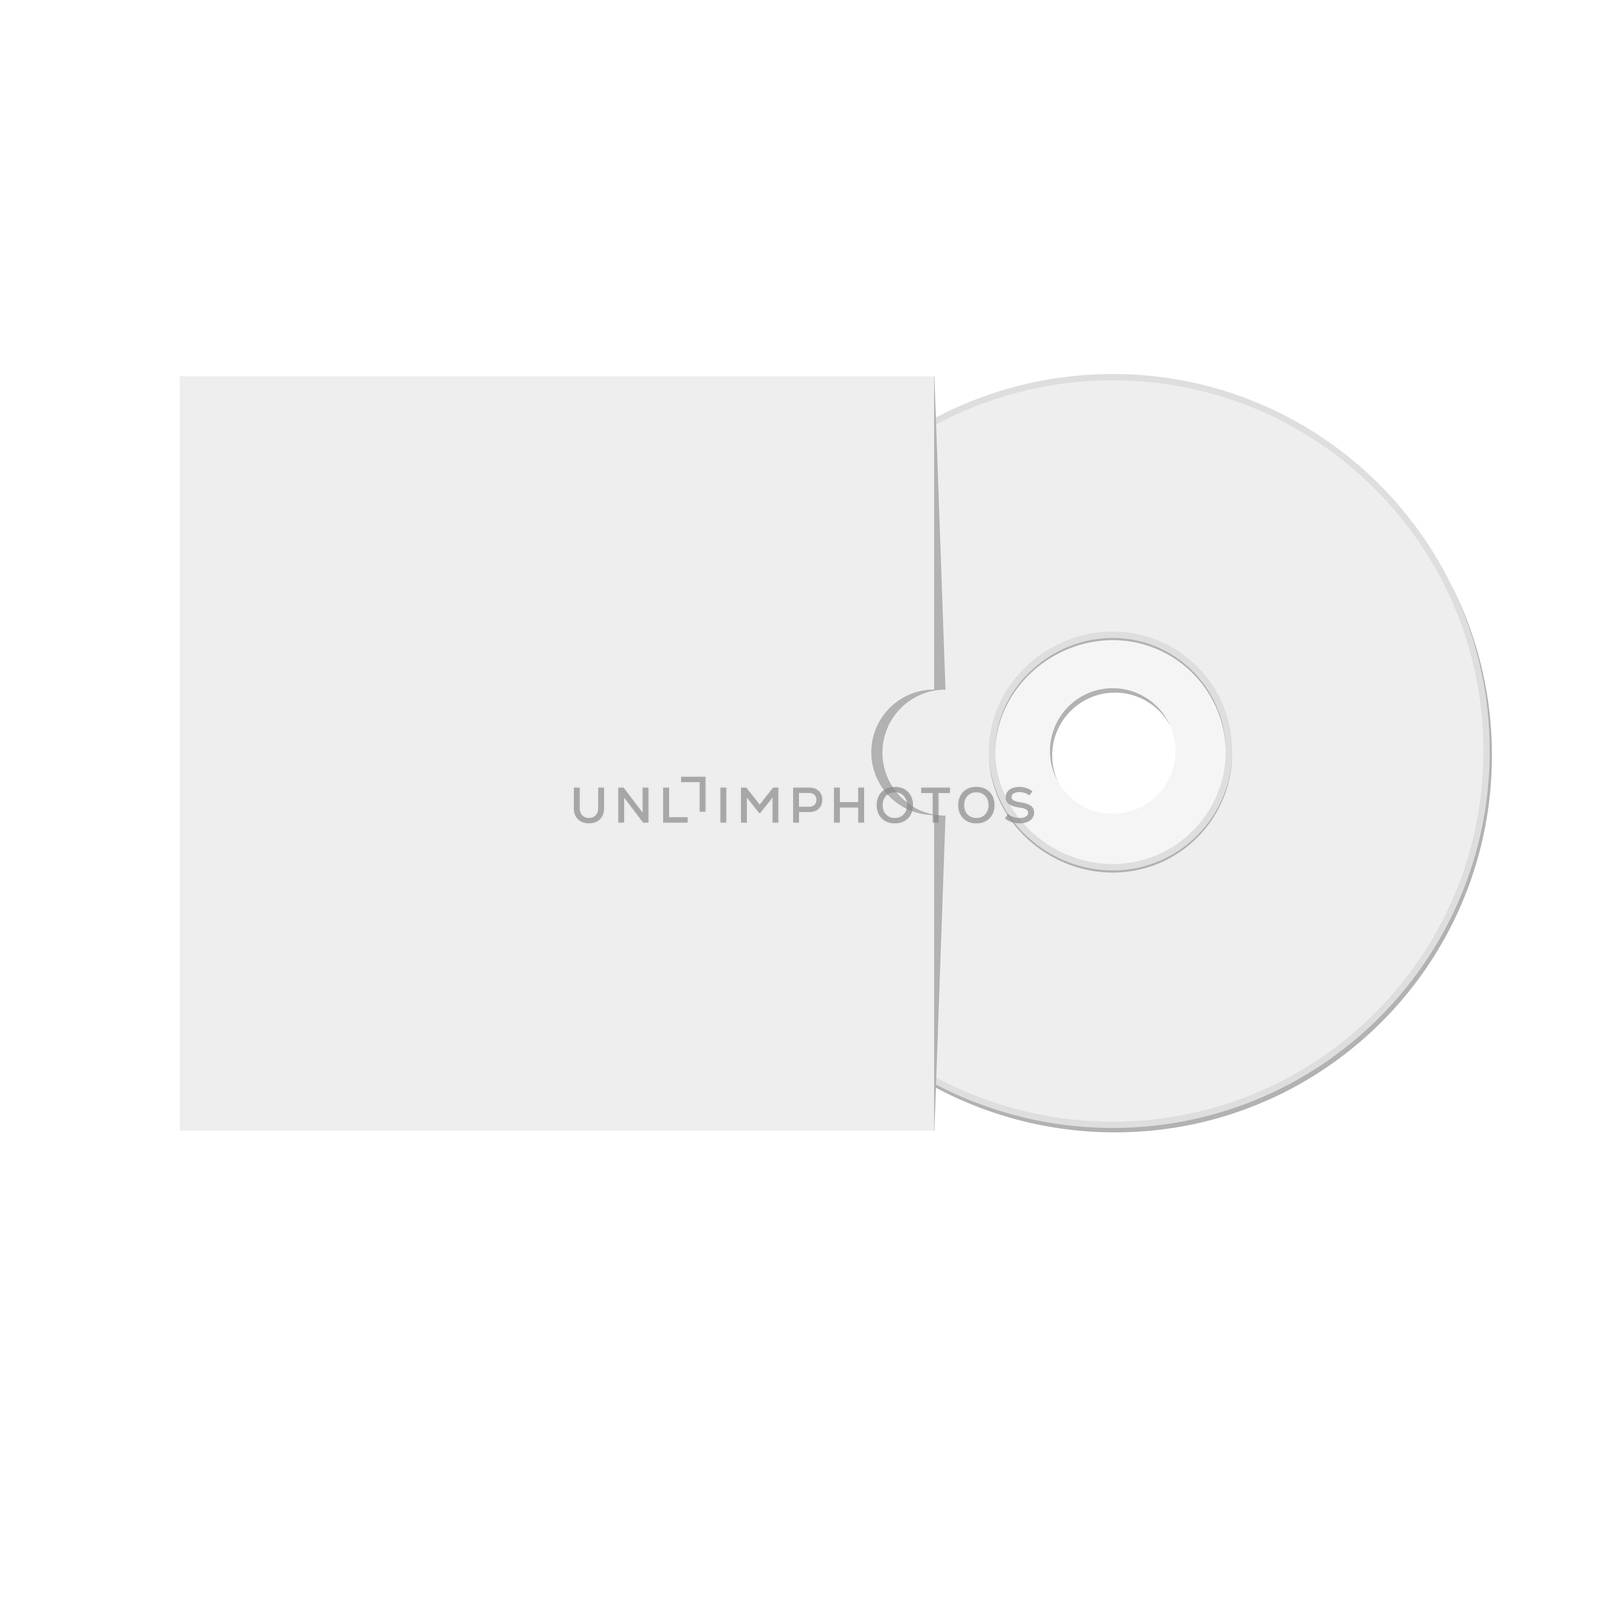  illustration of Dvd or cd video disc. Outline in white background.